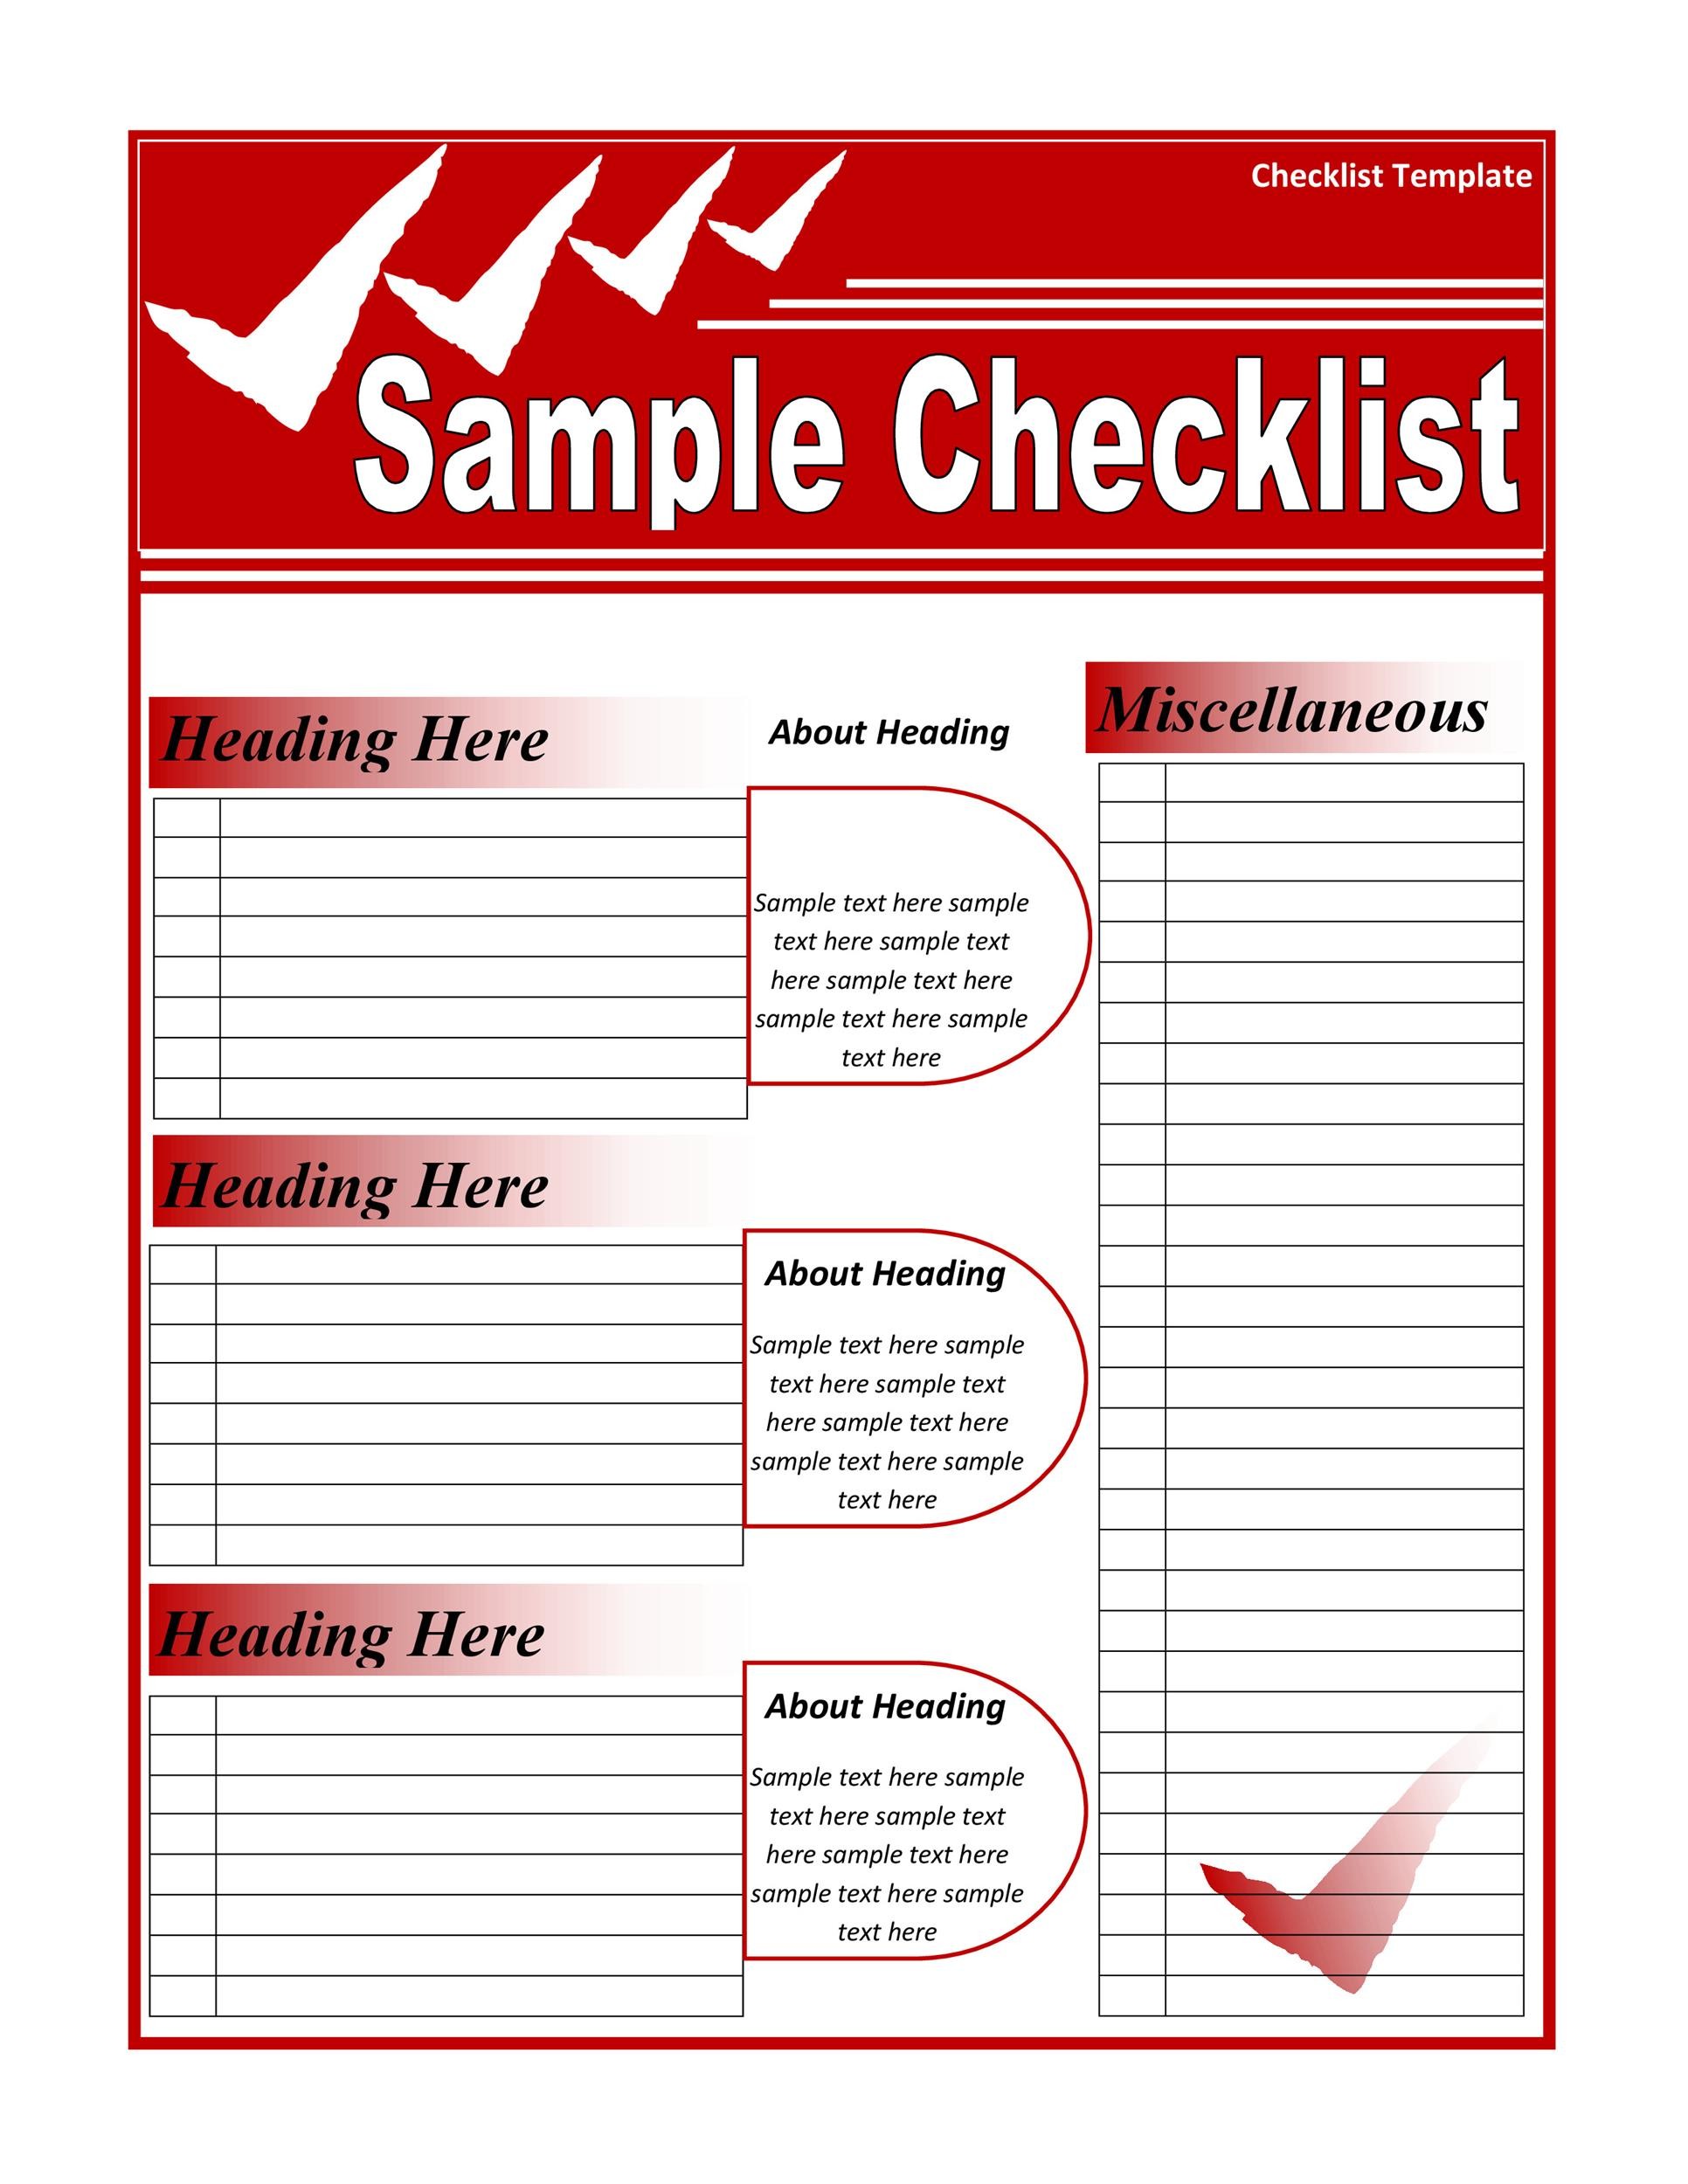 50-printable-to-do-list-checklist-templates-excel-word